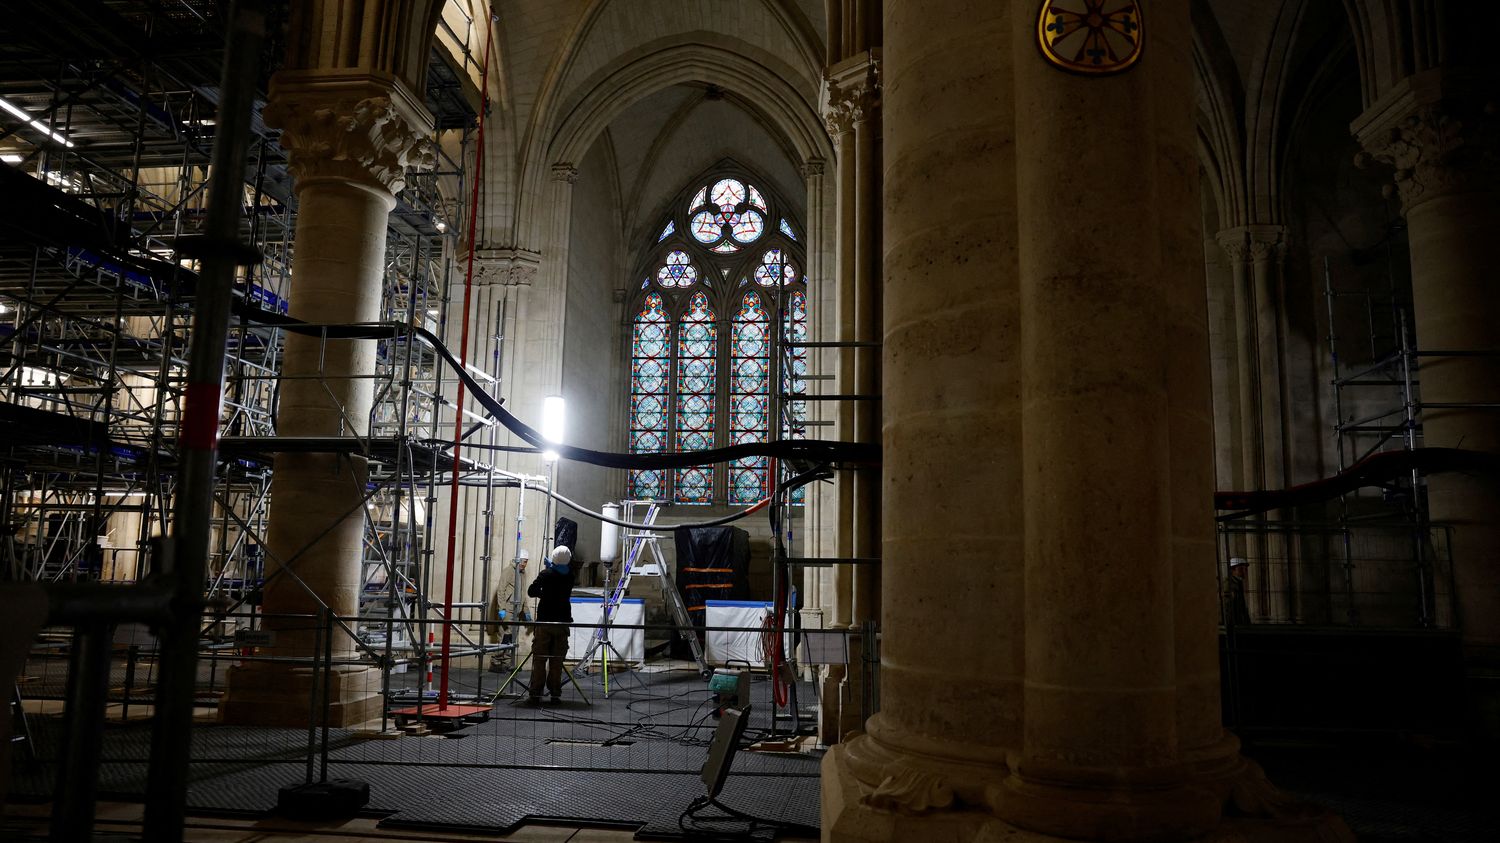 Reconstruction of Notre-Dame de Paris: from basement to tower, how the construction site helped unravel the cathedral's mysteries and advance scientific knowledge